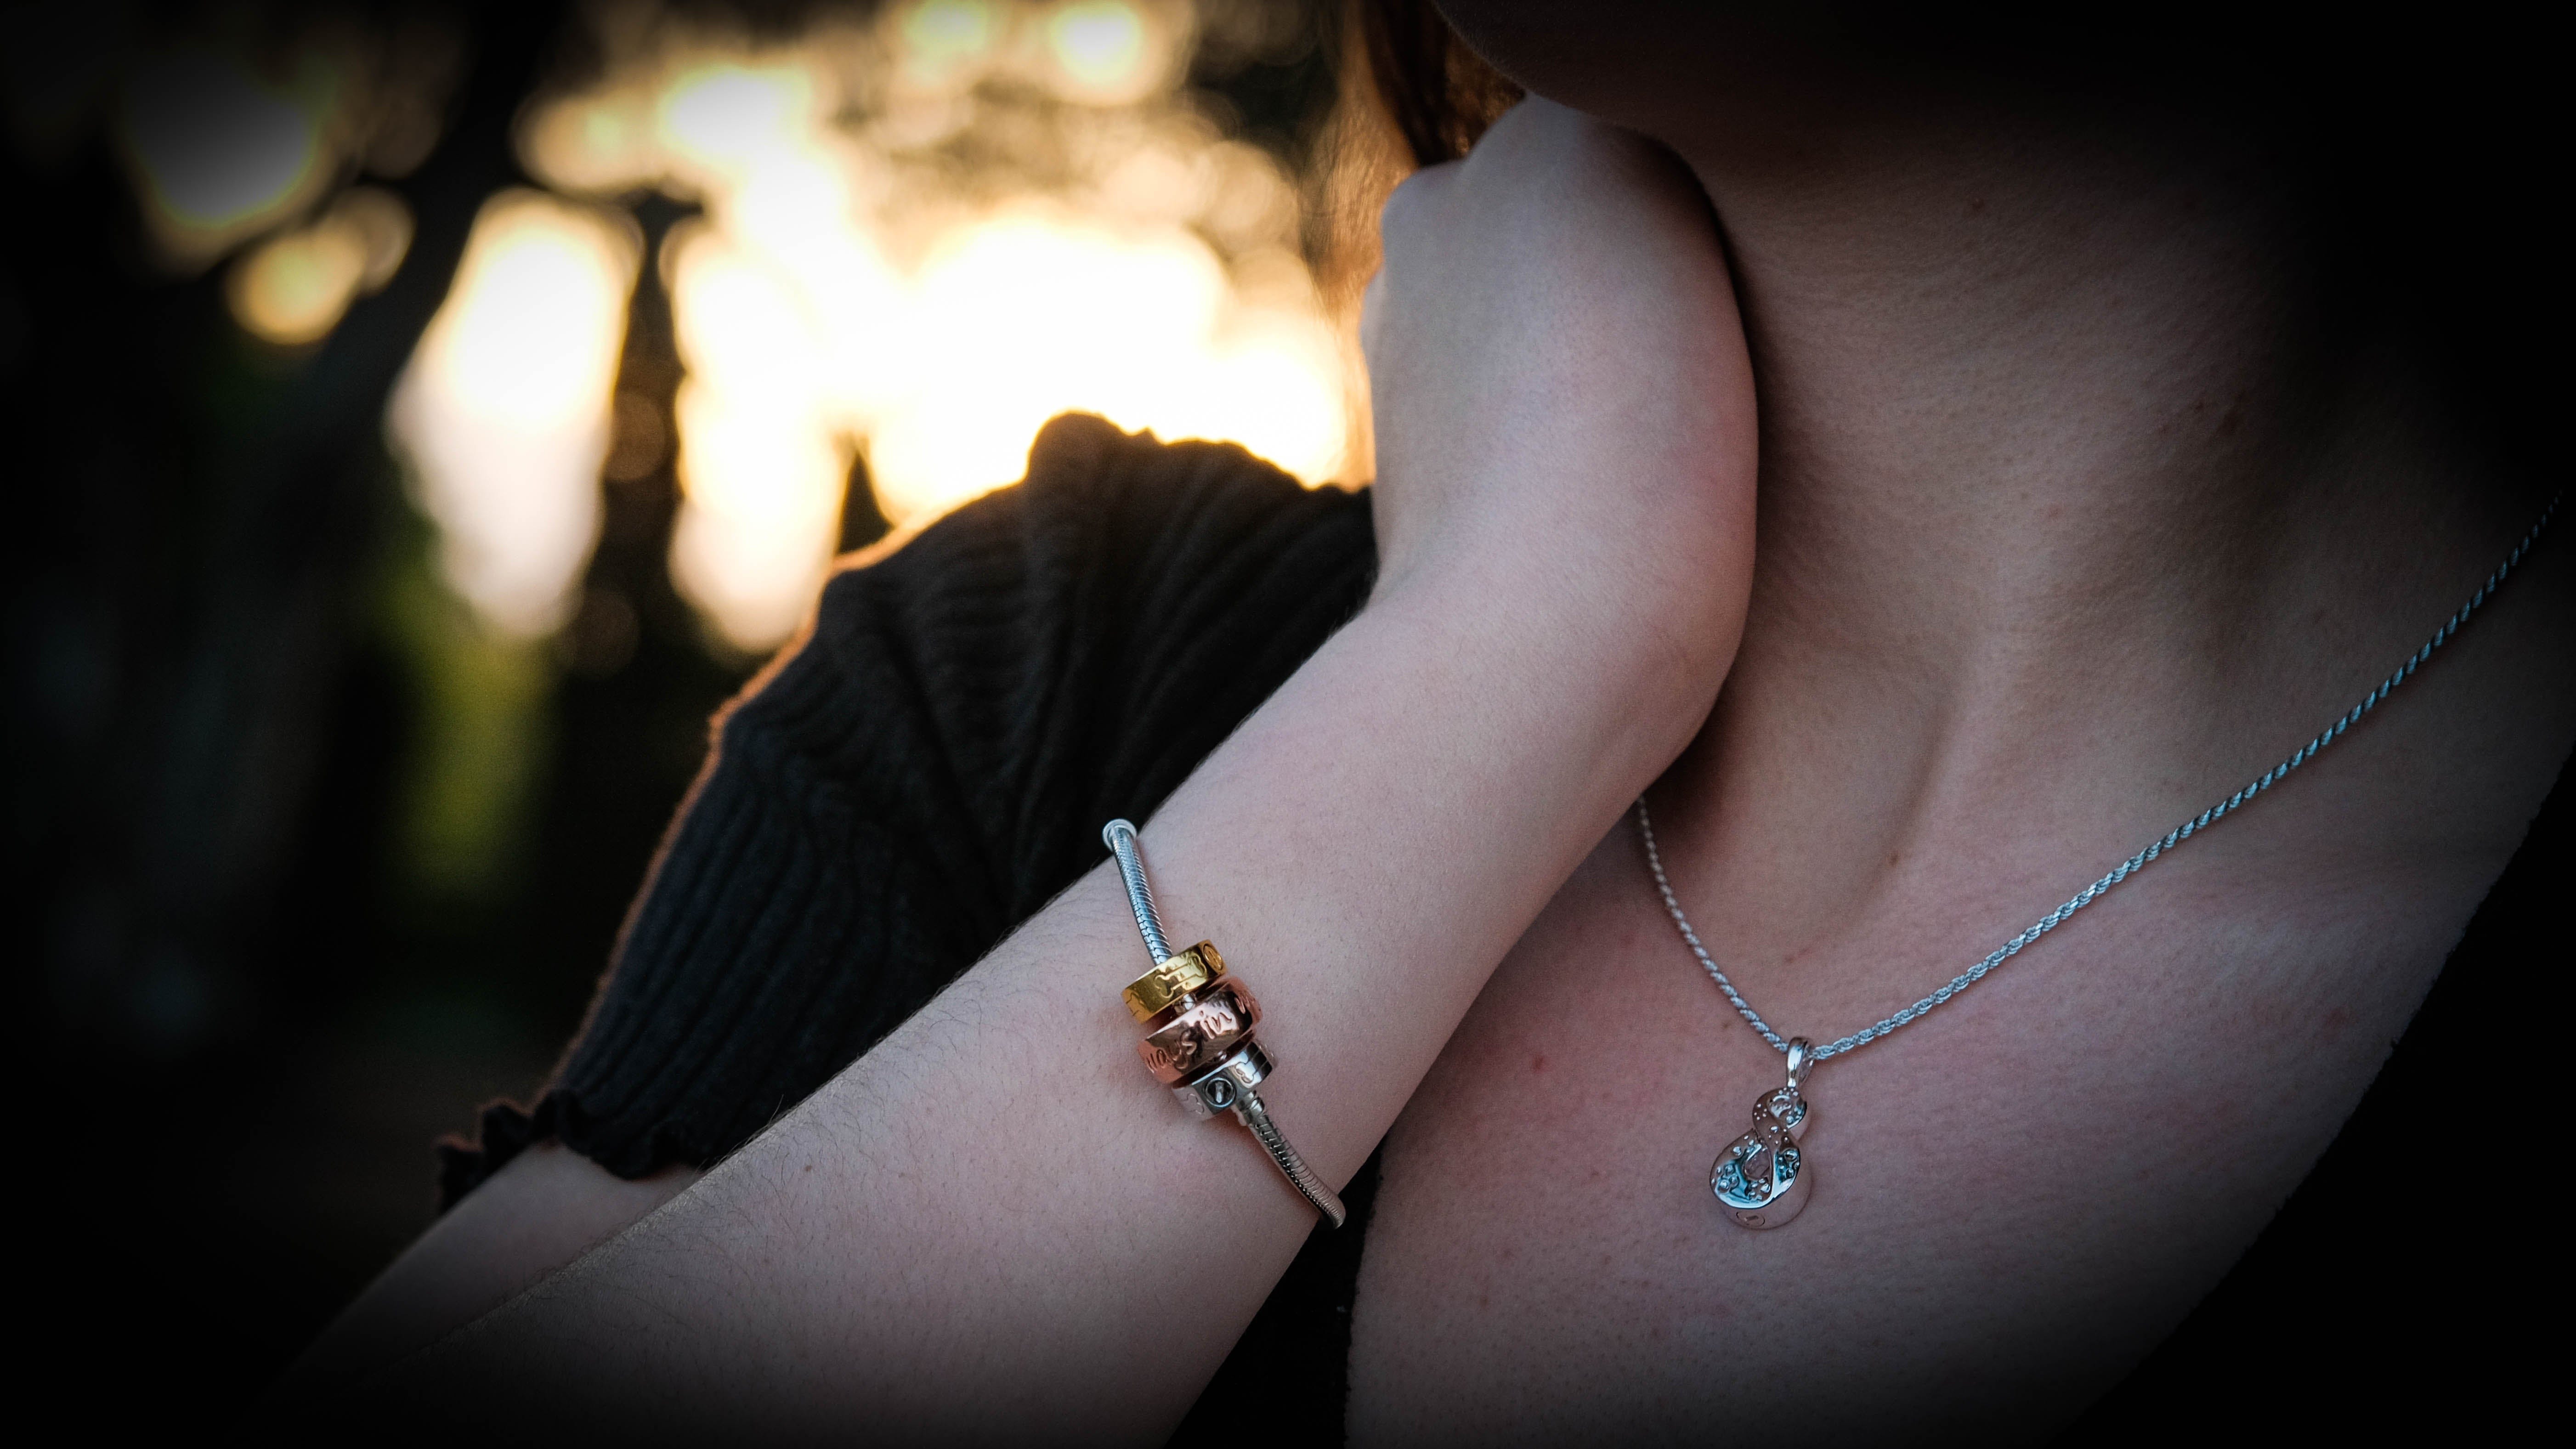 photo of person wearing jewellery  Edit alt text